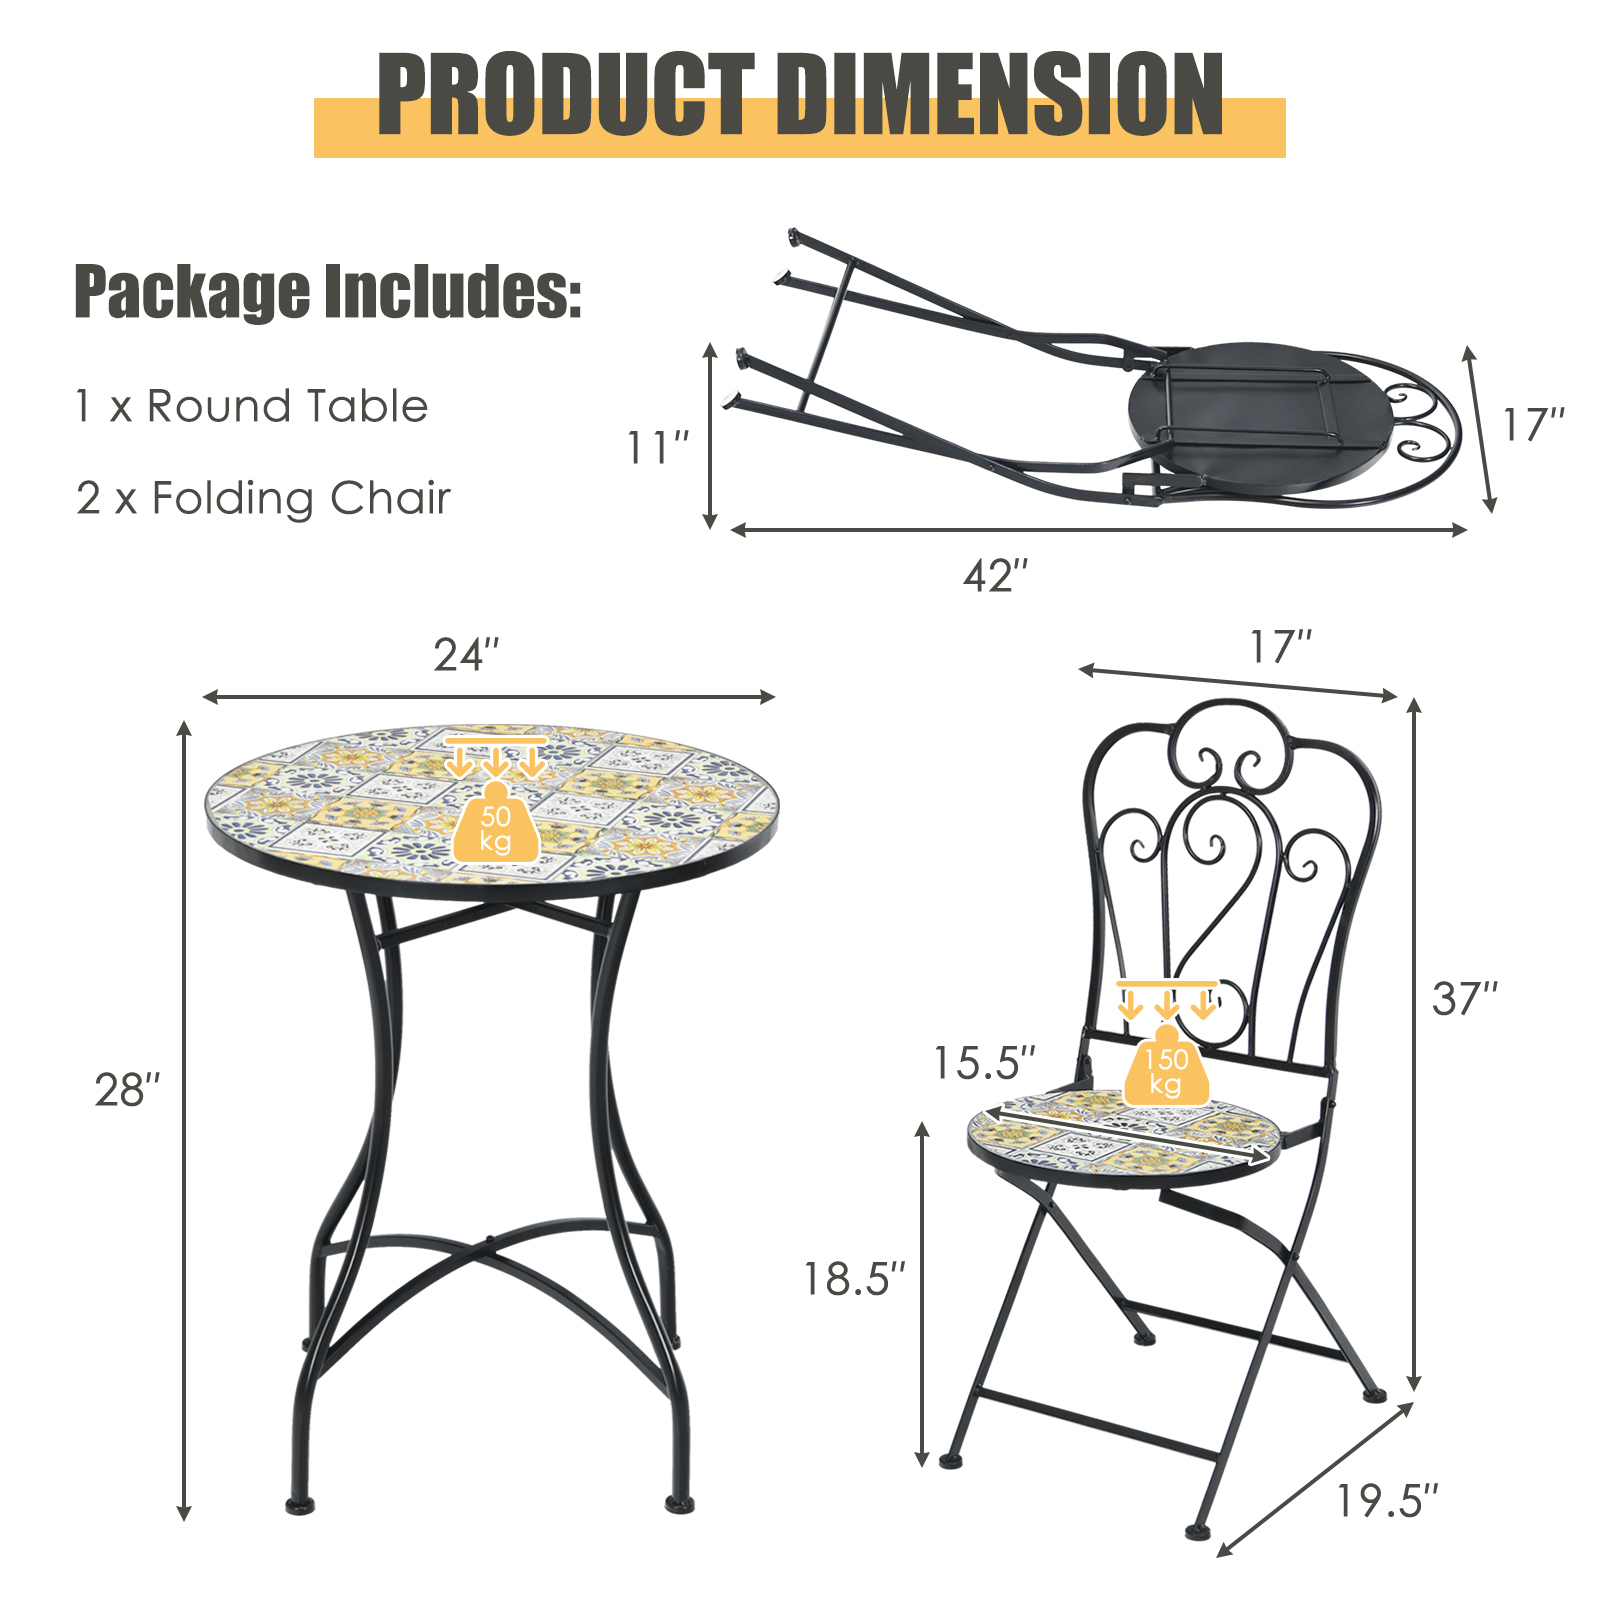 Patiojoy 3PCS Patio Mosaic Design Folding Chairs Side Table Set Bistro Set Classic Furniture Chair Set for Garden - image 3 of 8